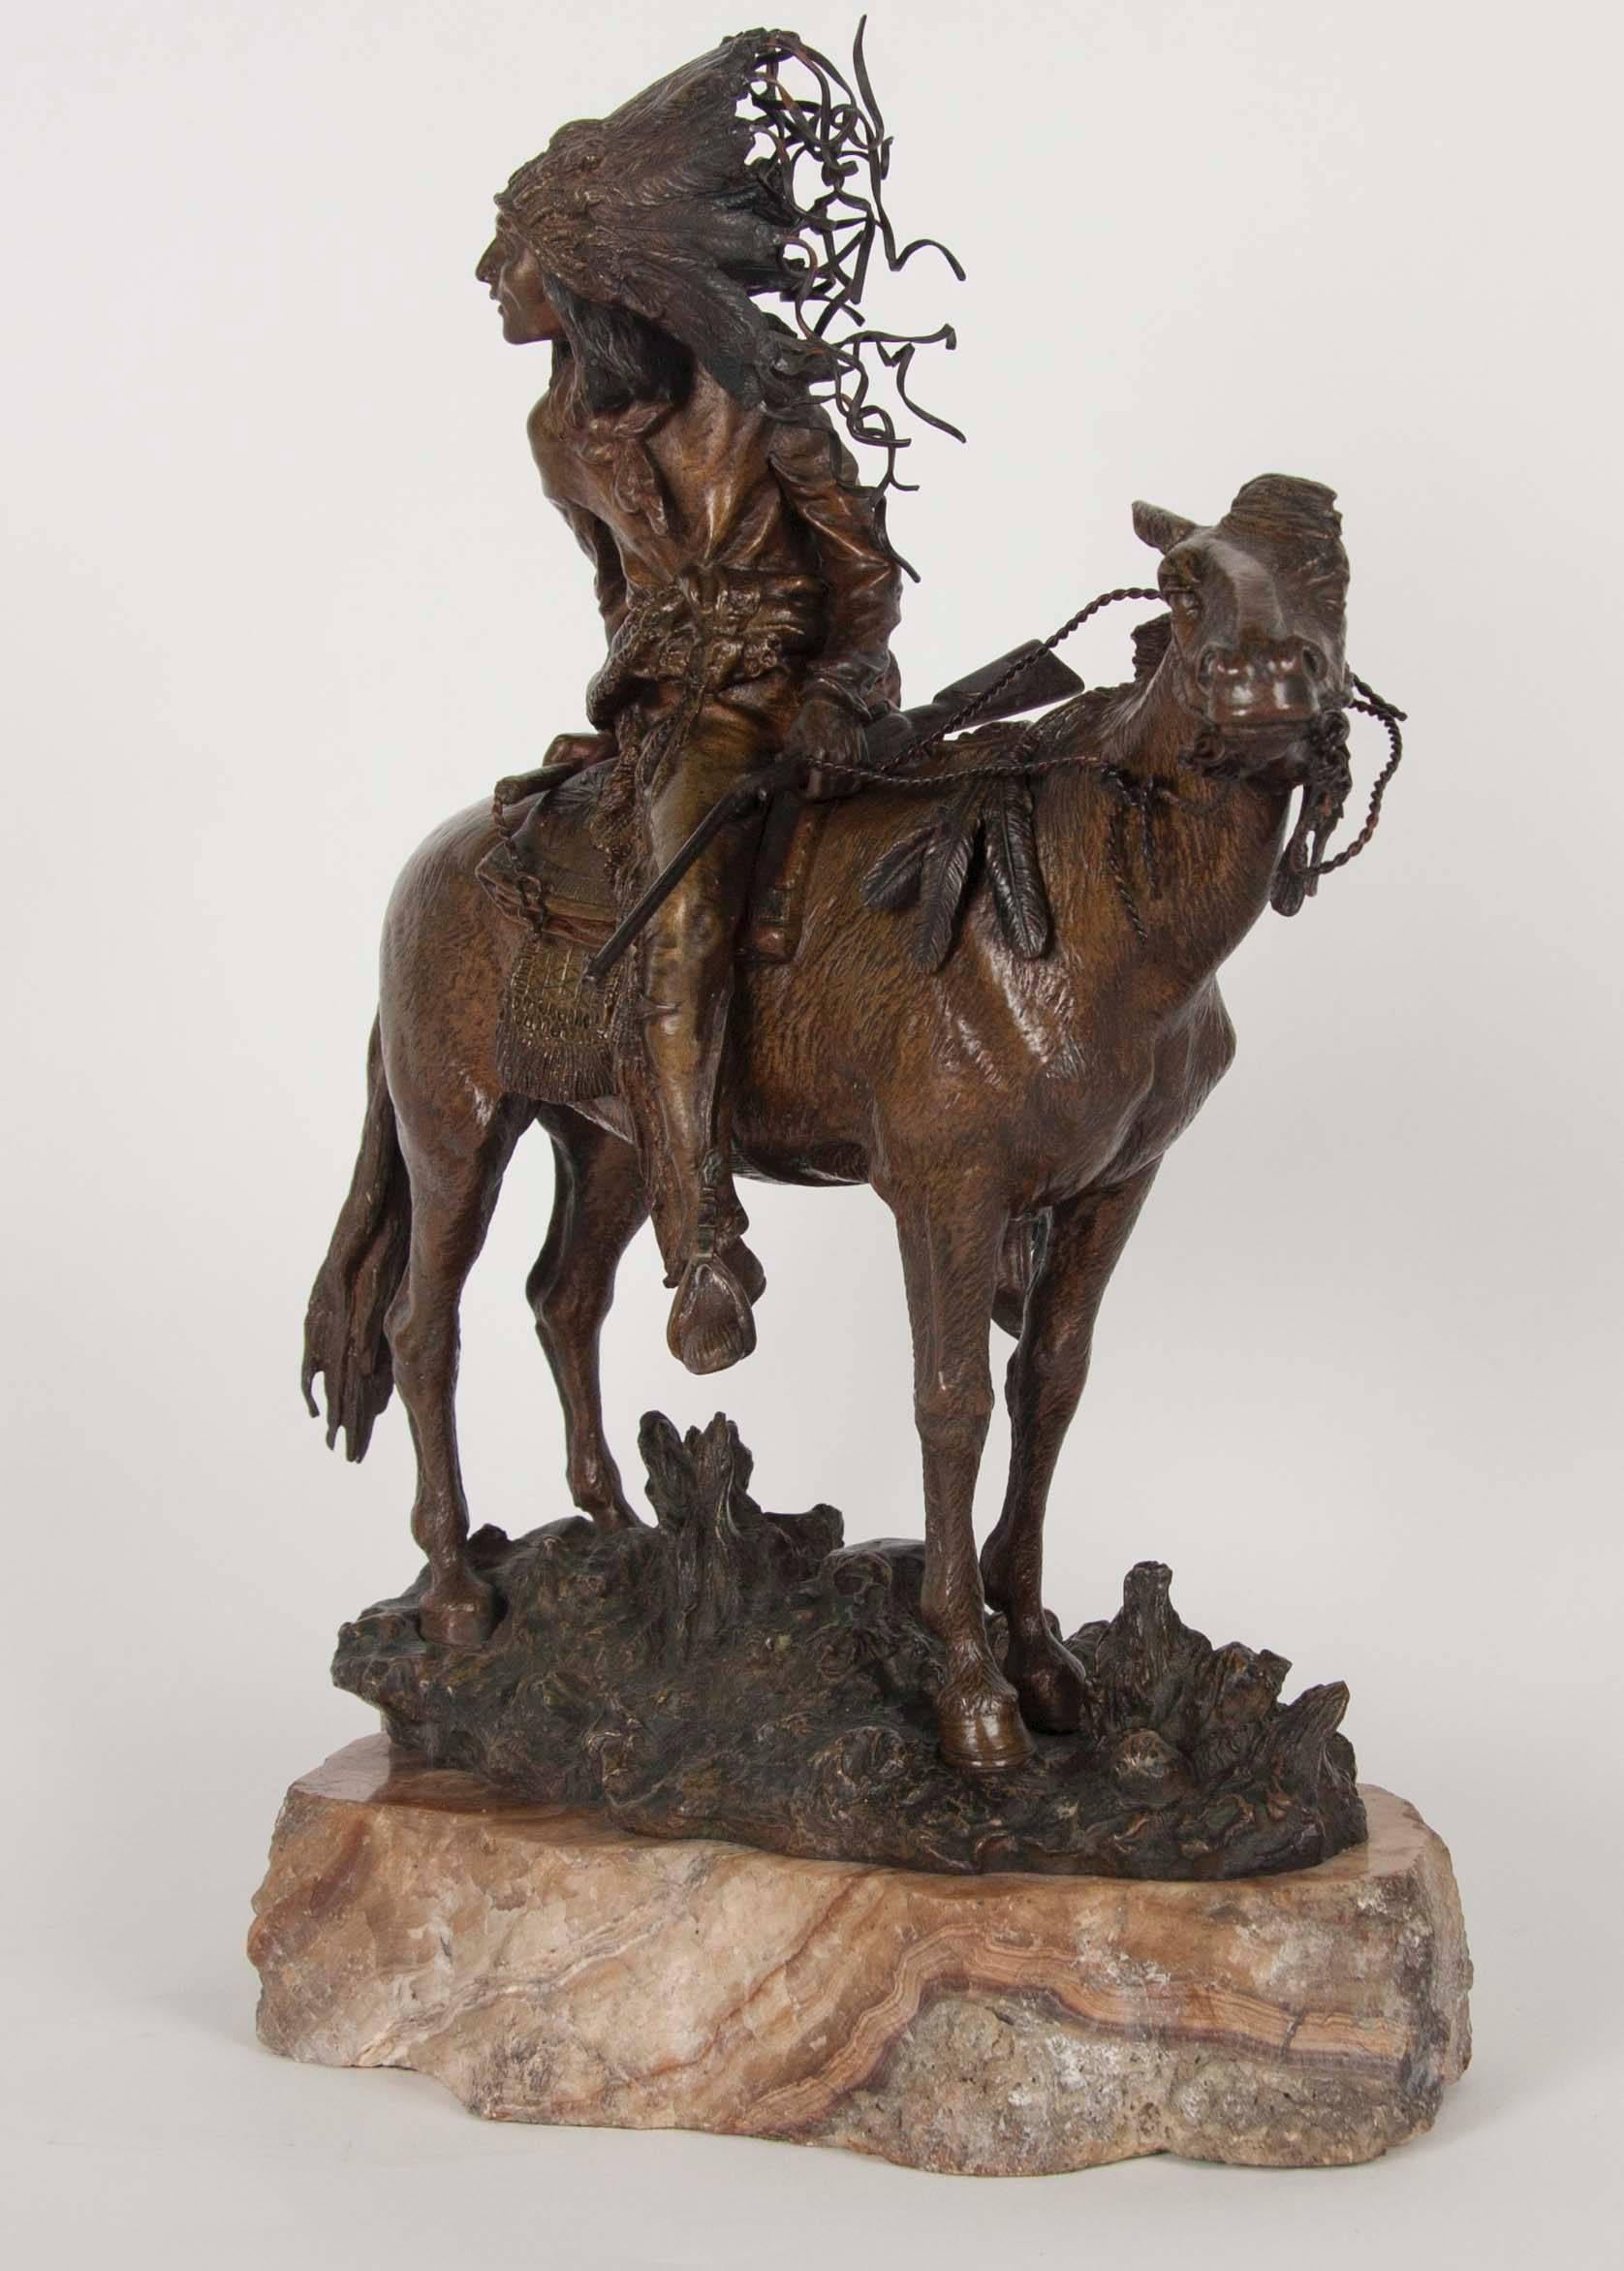 A Carl Kauba patinated bronze of an Indian on horseback on original marble base. Marked T. Curts aka Carl Kauba with original foundry mark and copyright mark From Vienna.